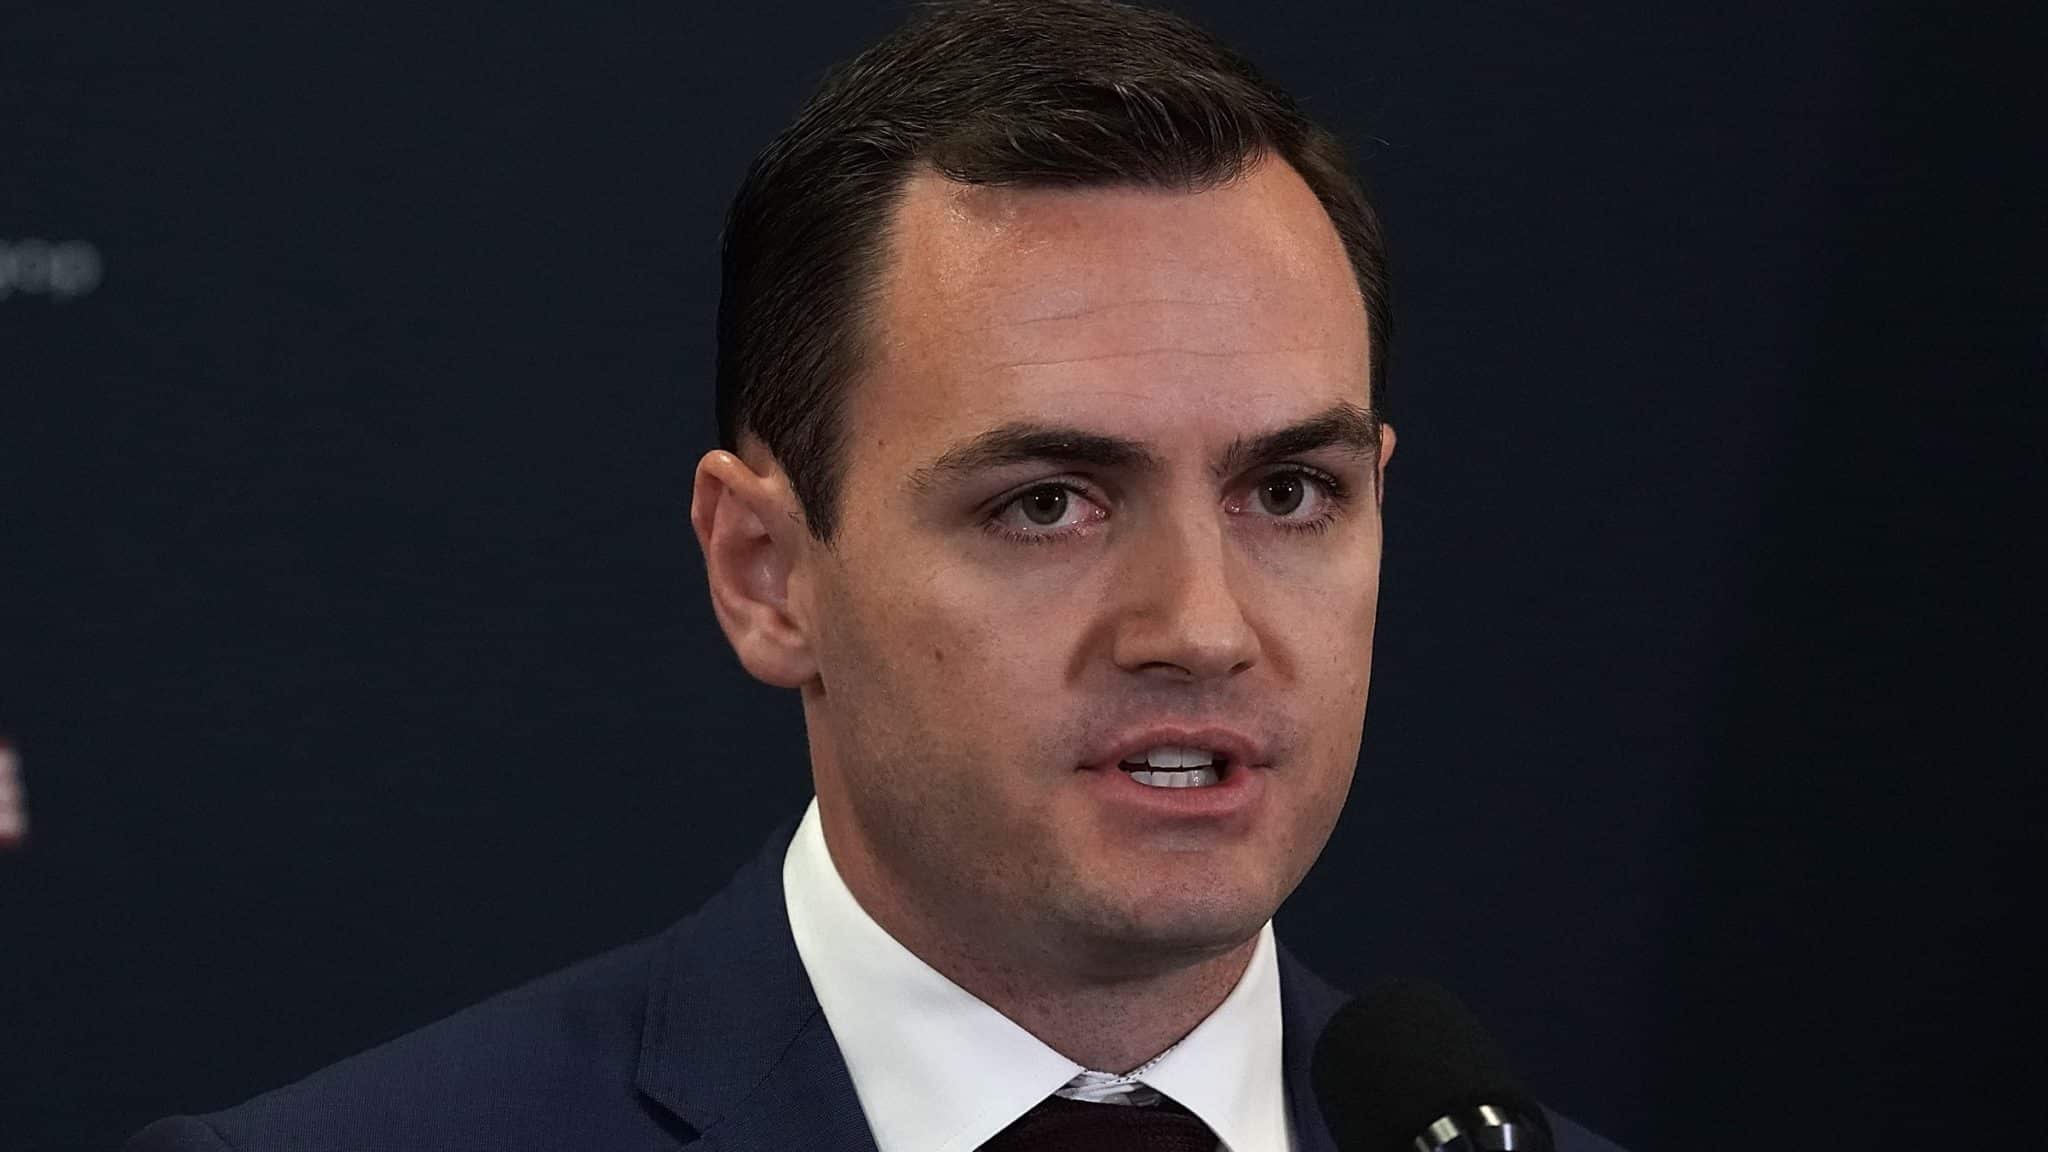 Wisconsin Congressman Mike Gallagher leads charge questioning COVID19